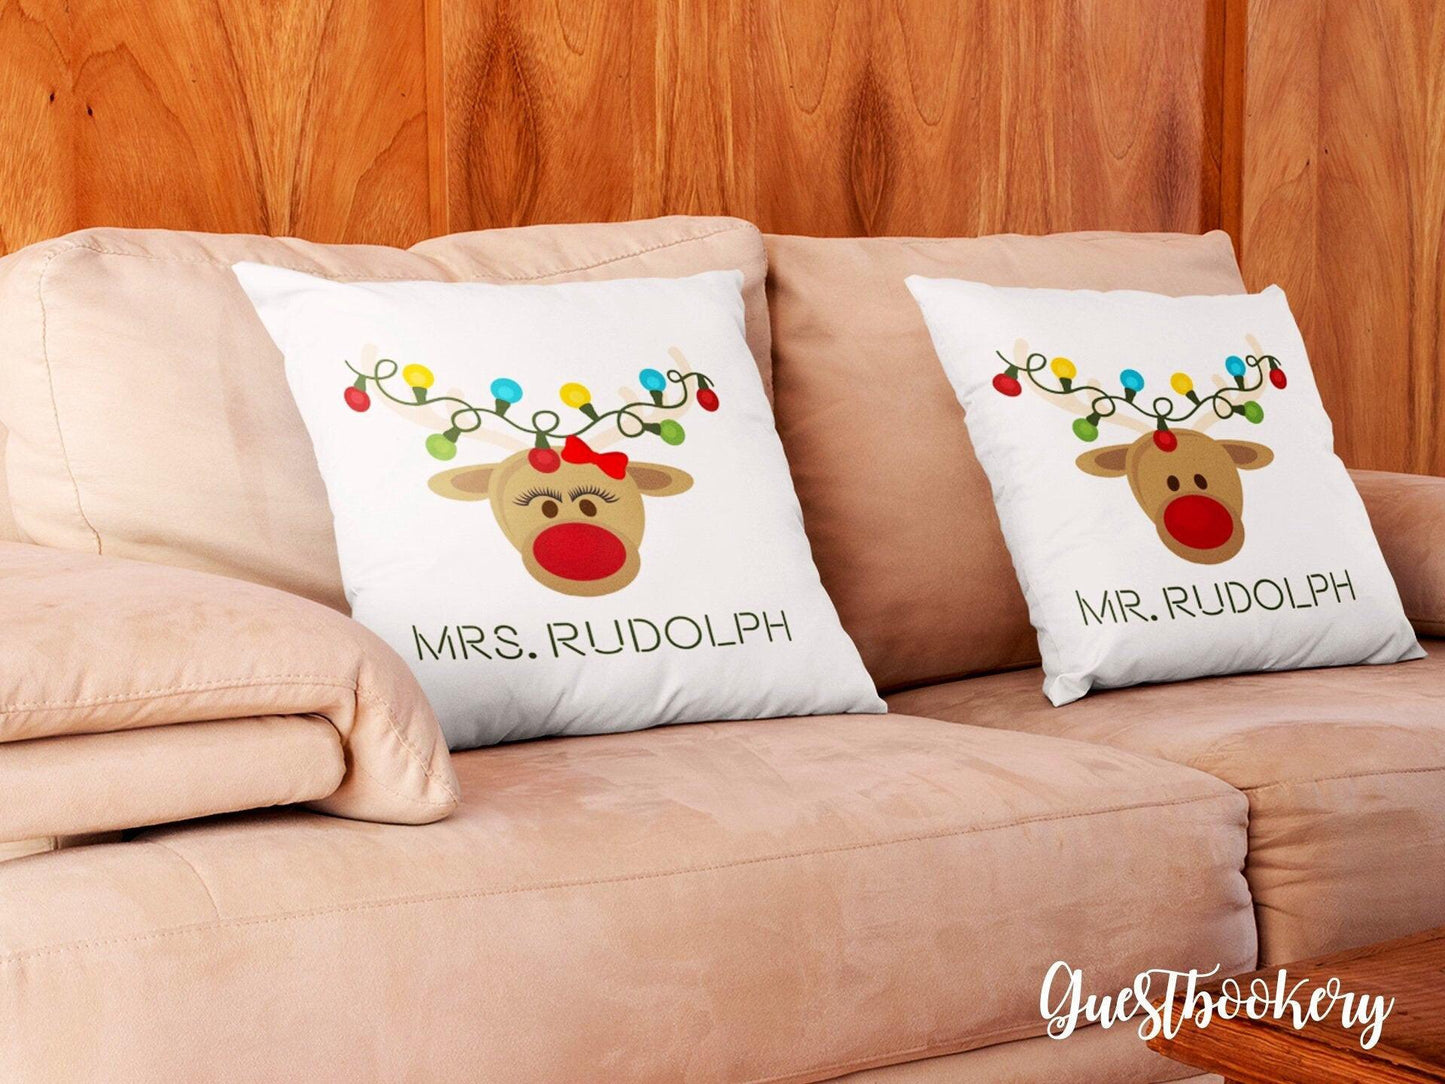 Mr and Mrs Rudolph Pillows